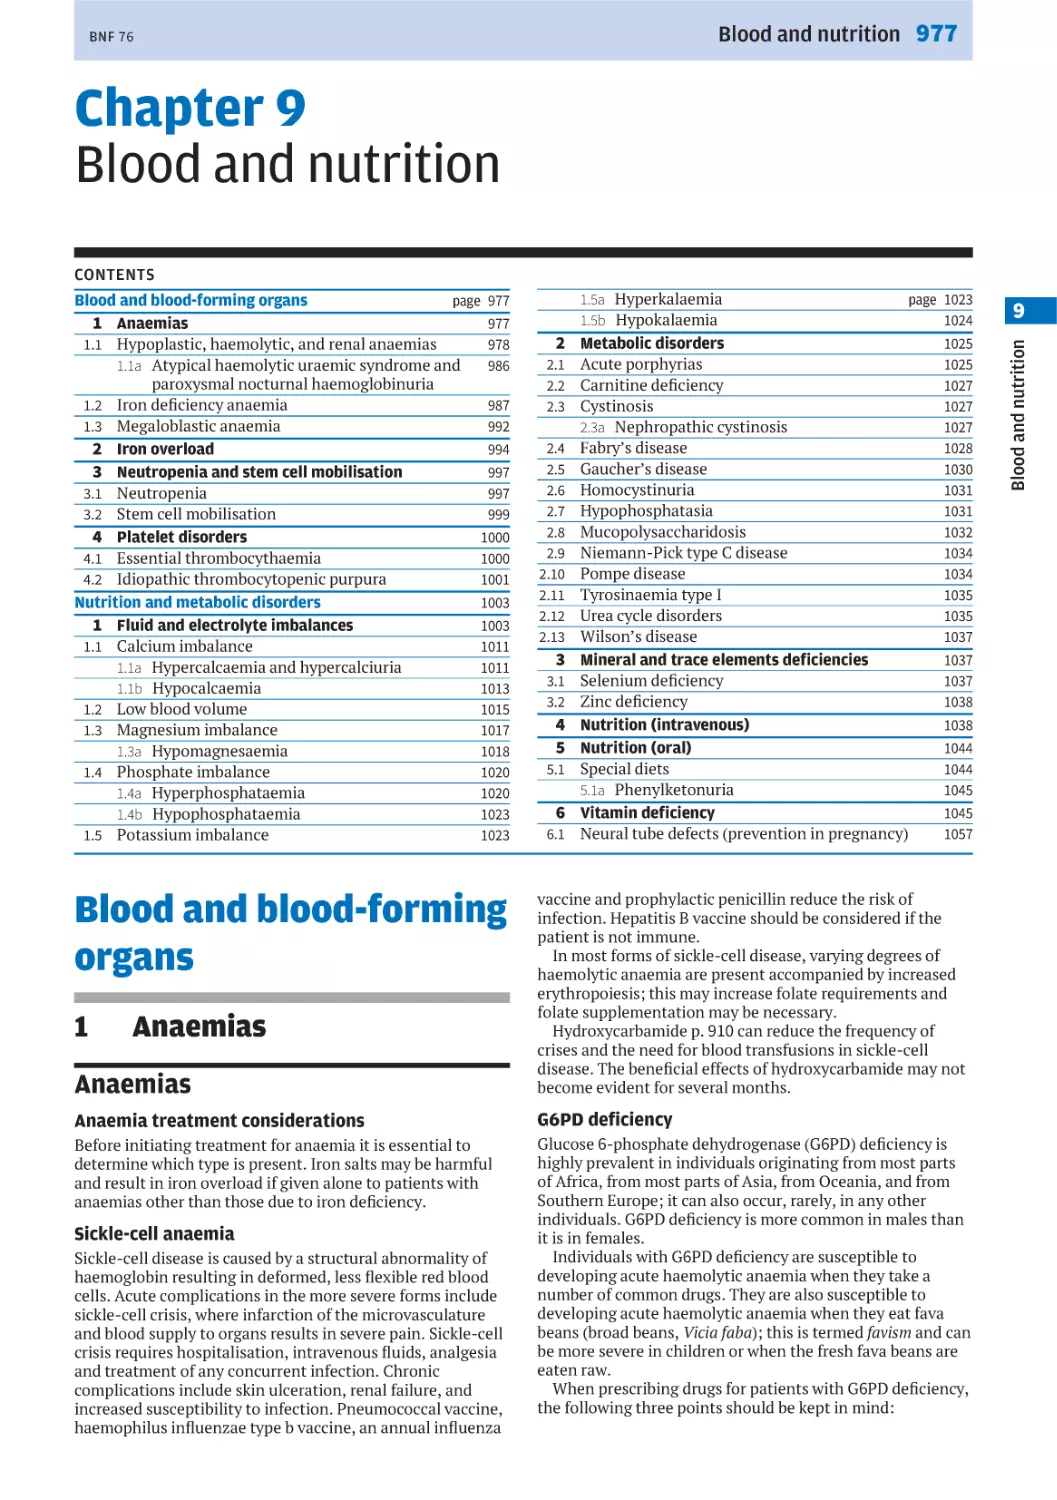 Chapter 9 Blood and nutrition
Blood and blood-forming organs
Anaemias